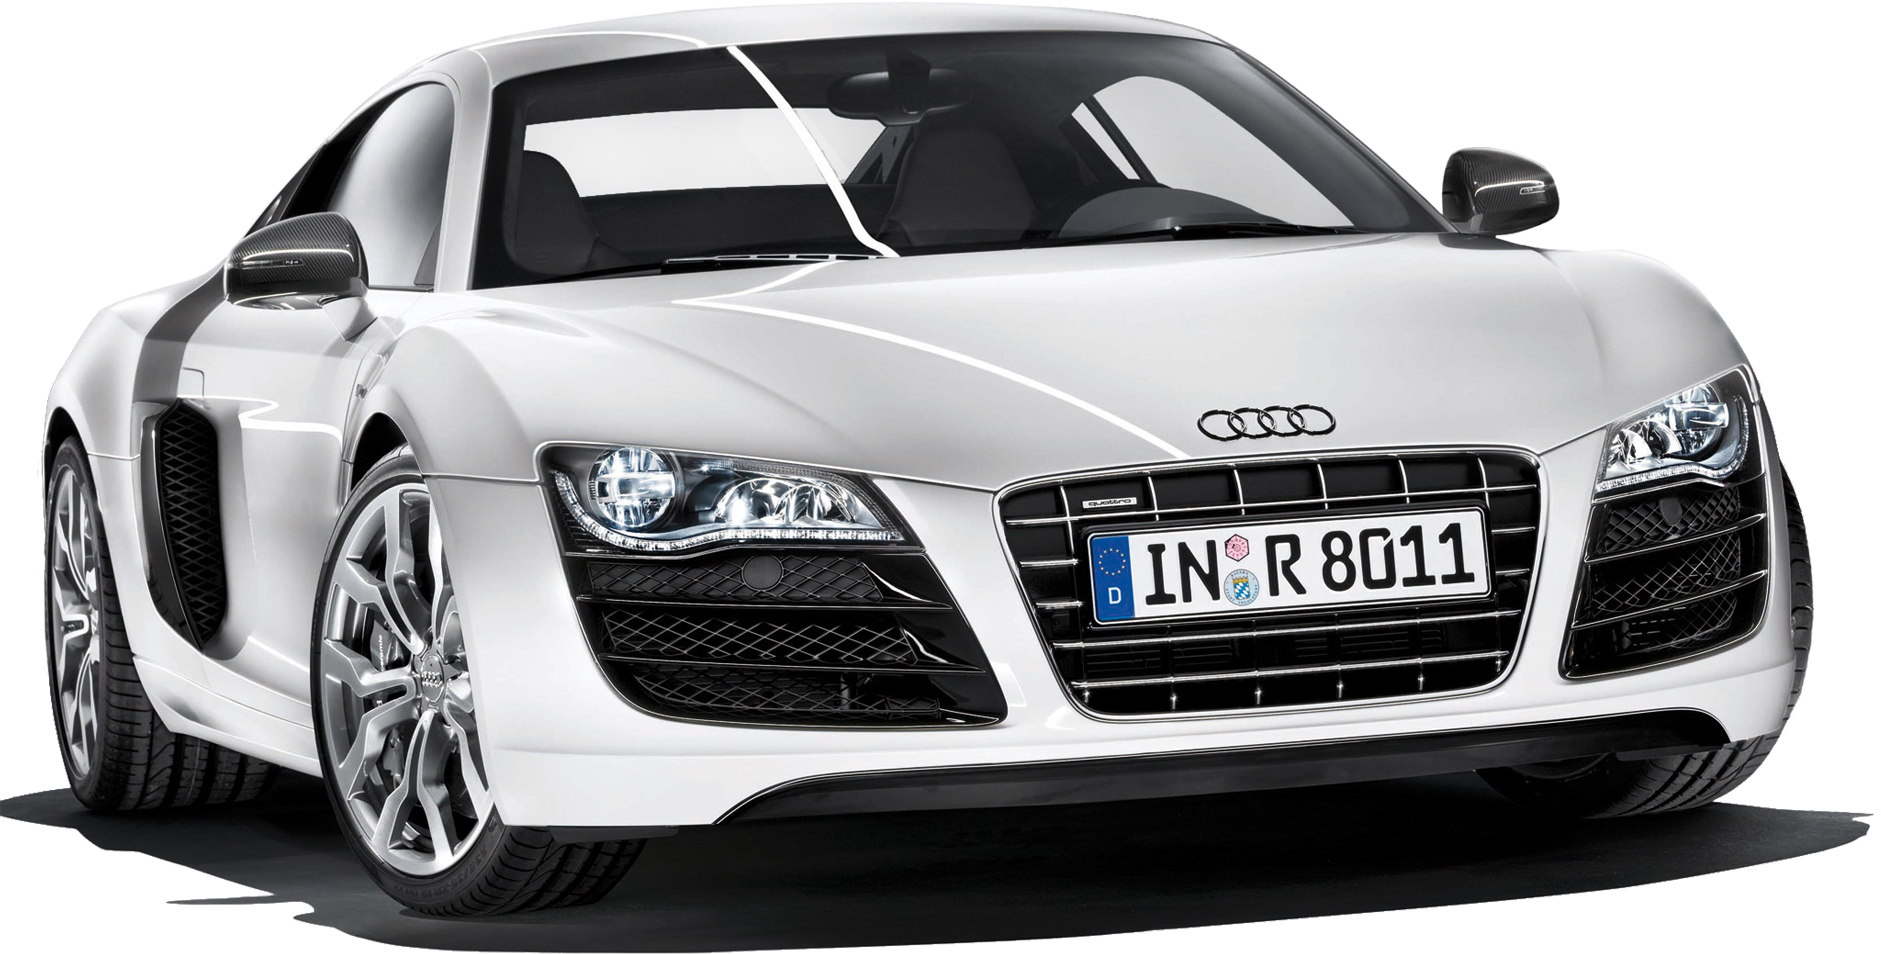 Audi voiture PNG image